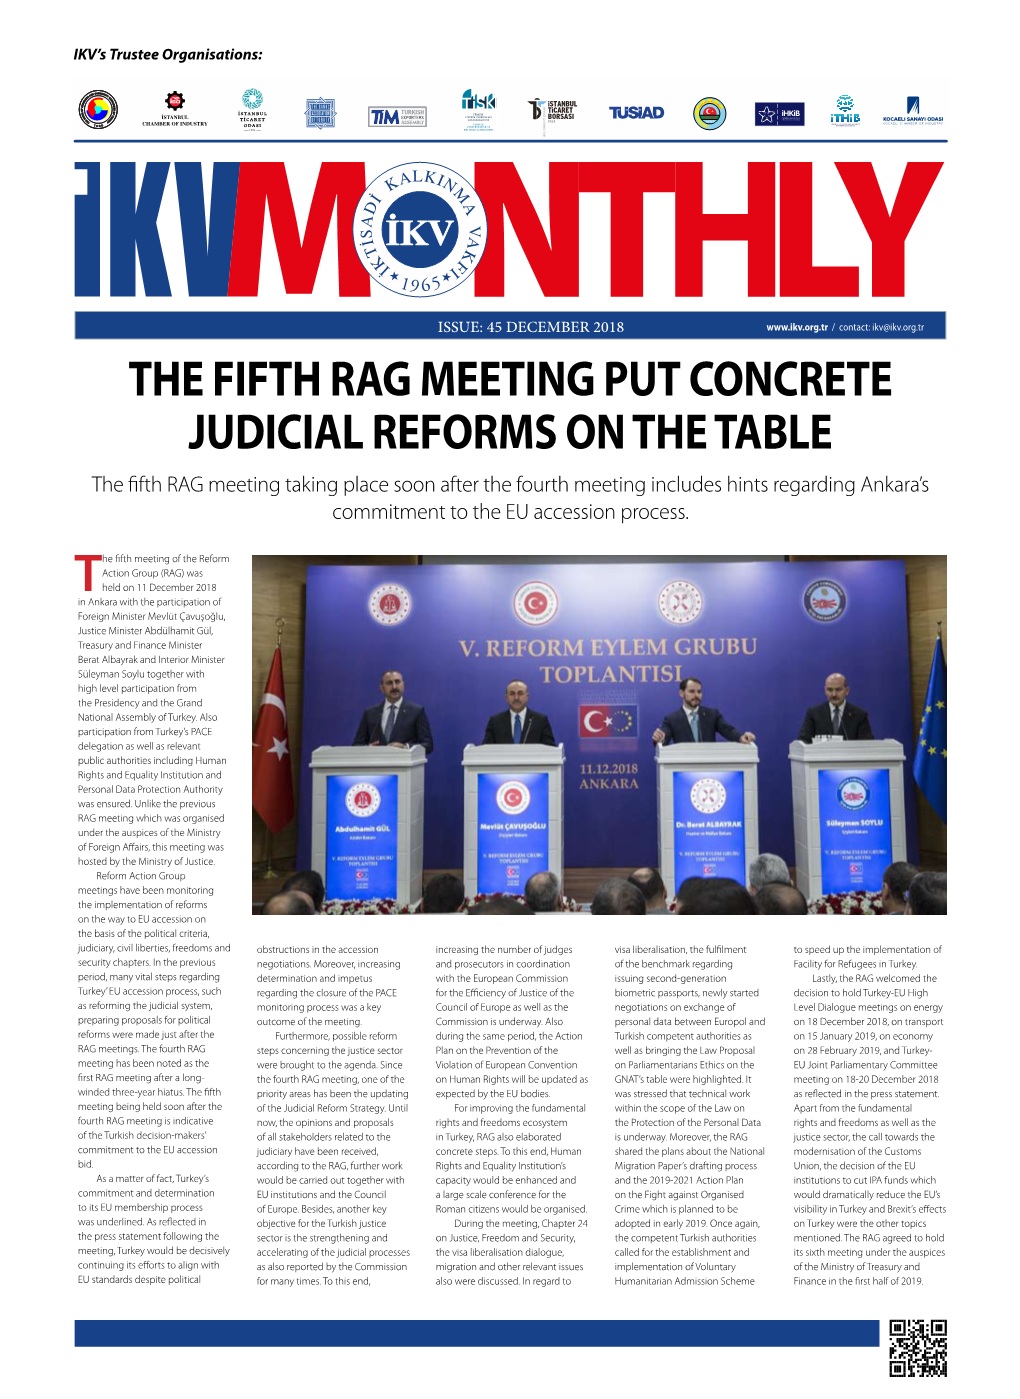 The Fifth Rag Meeting Put Concrete Judicial Reforms on the Table